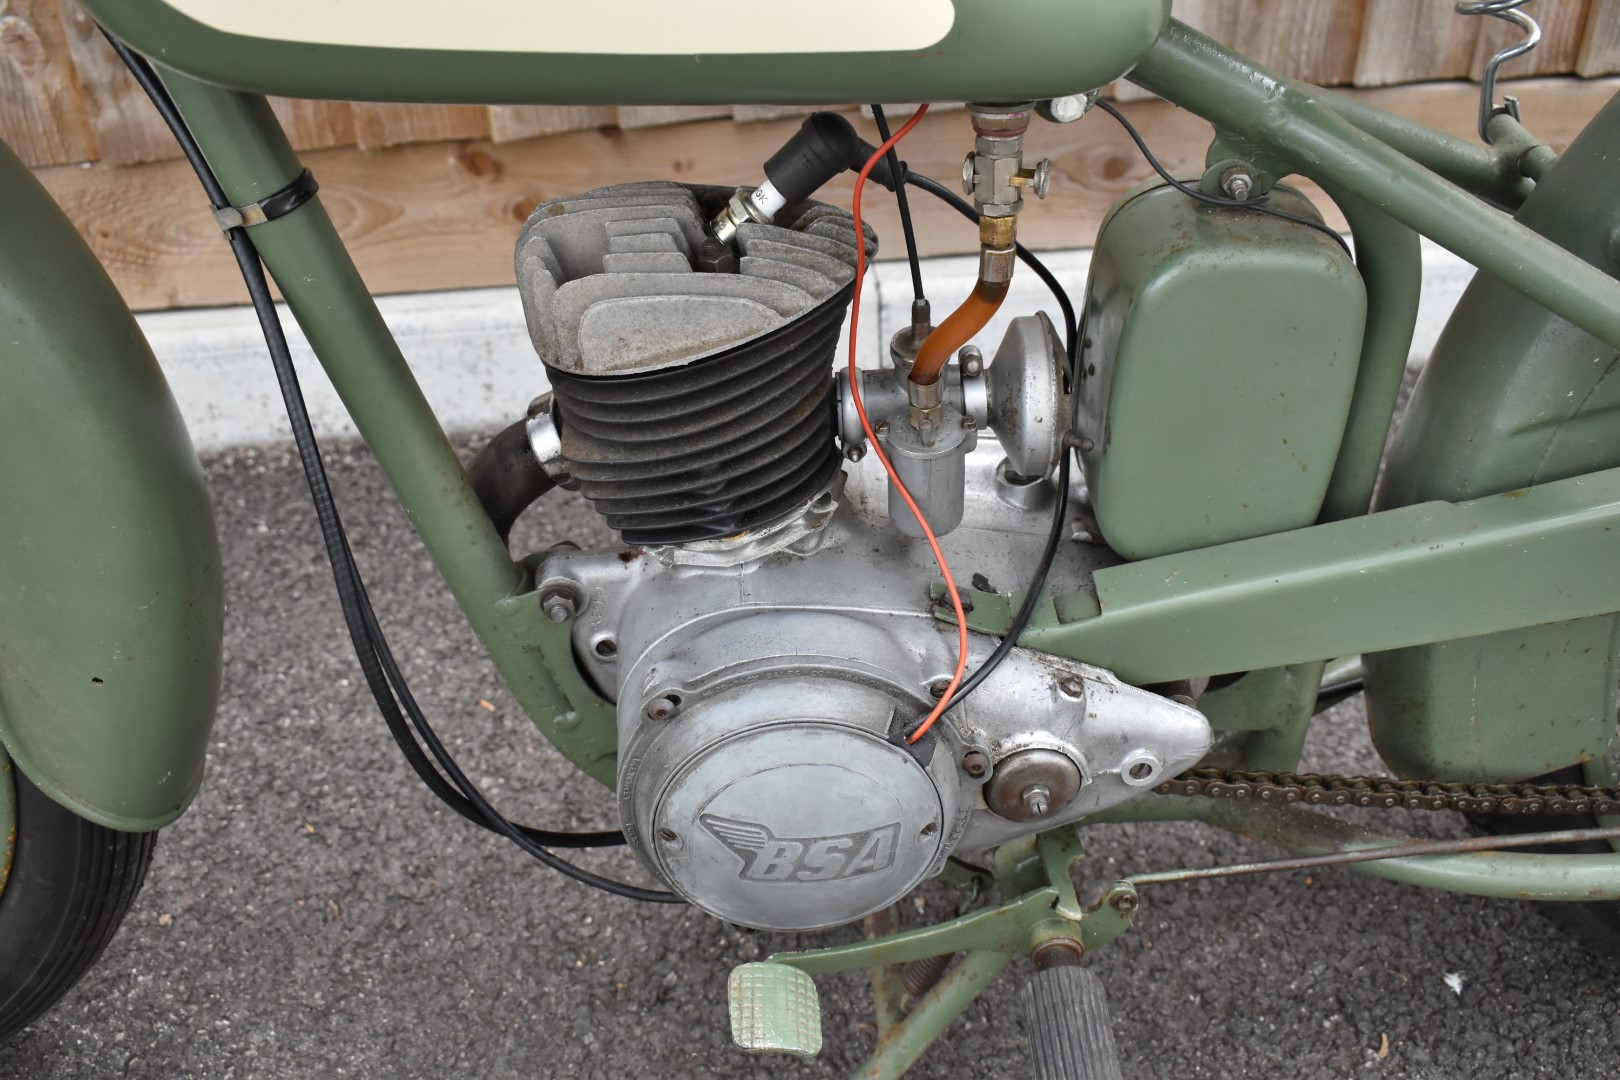 1952 BSA Bantam D1 125cc two stroke plunger motorbike, transferable registration number PHU 5,  with - Image 10 of 15